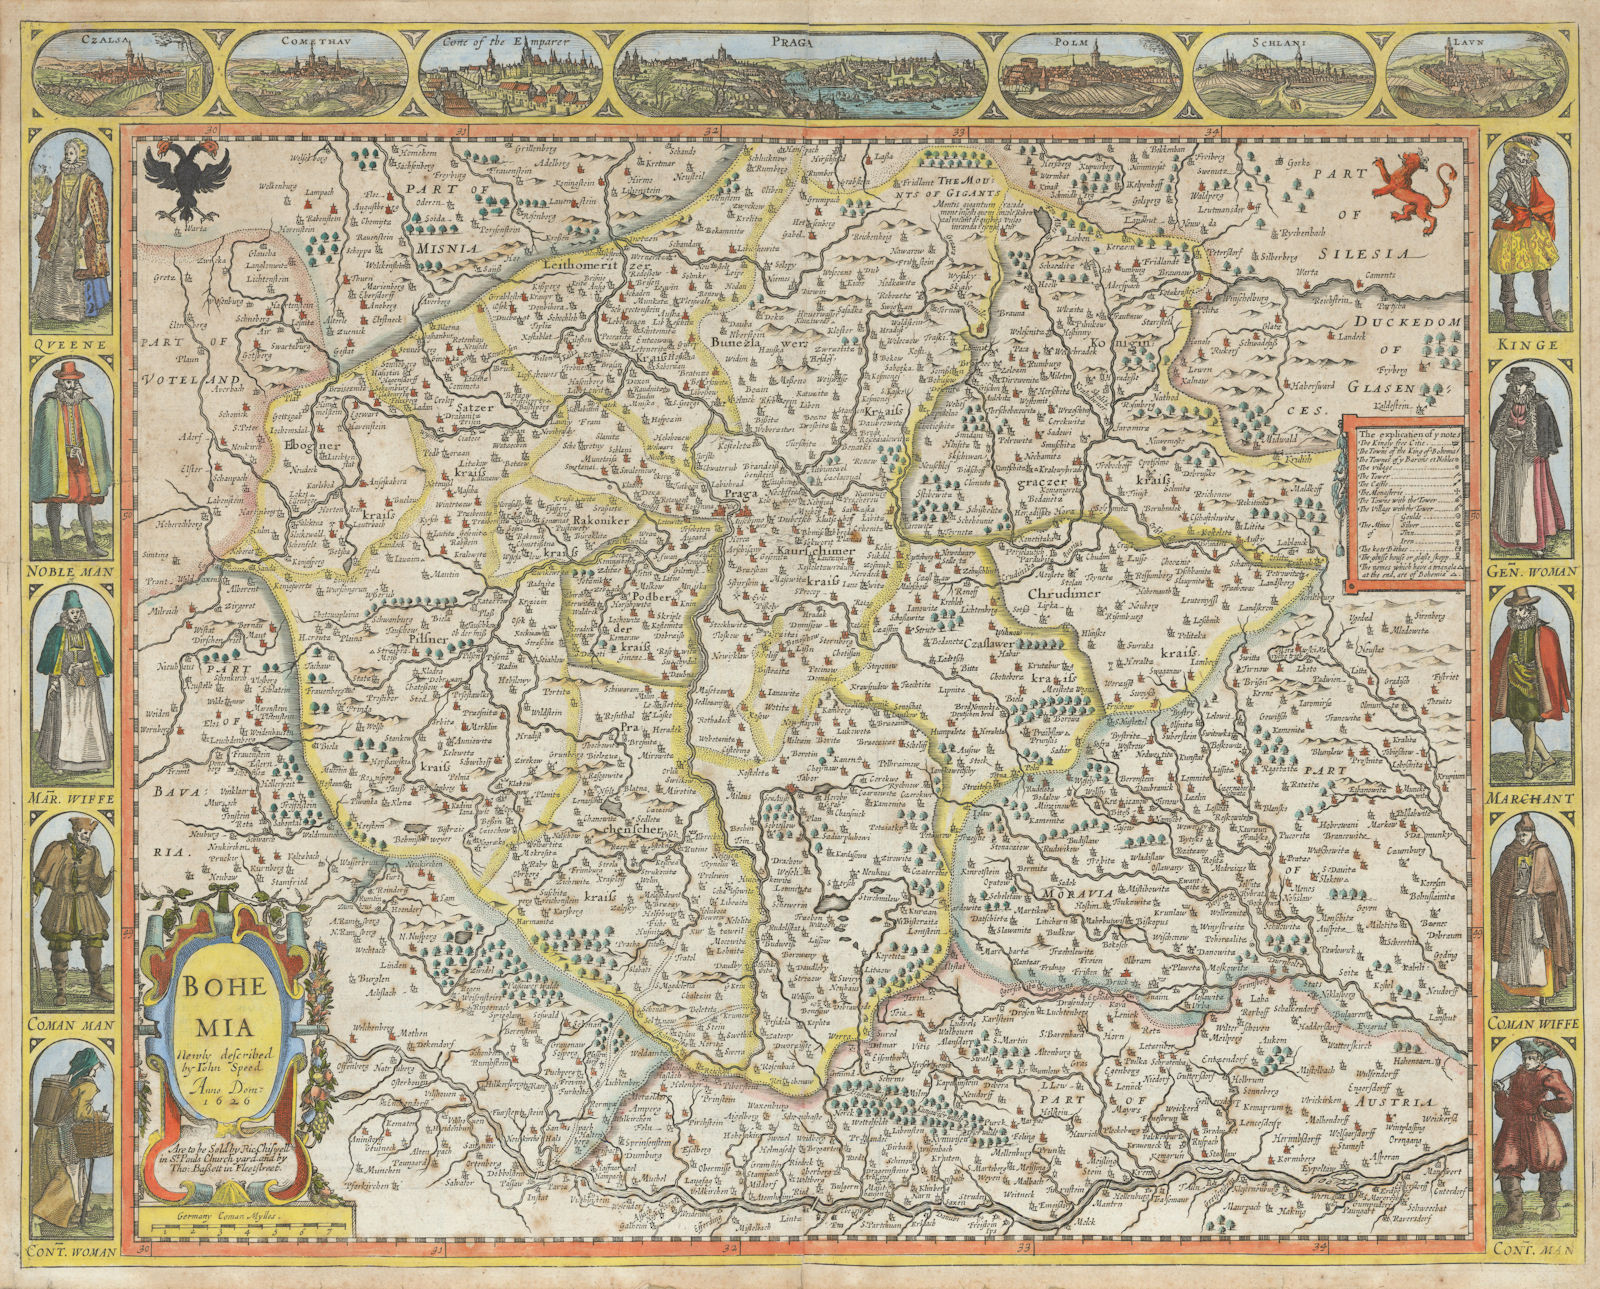 Associate Product Bohemia Newly described by John Speed… 1626. Bassett/Chiswell edition 1676 map